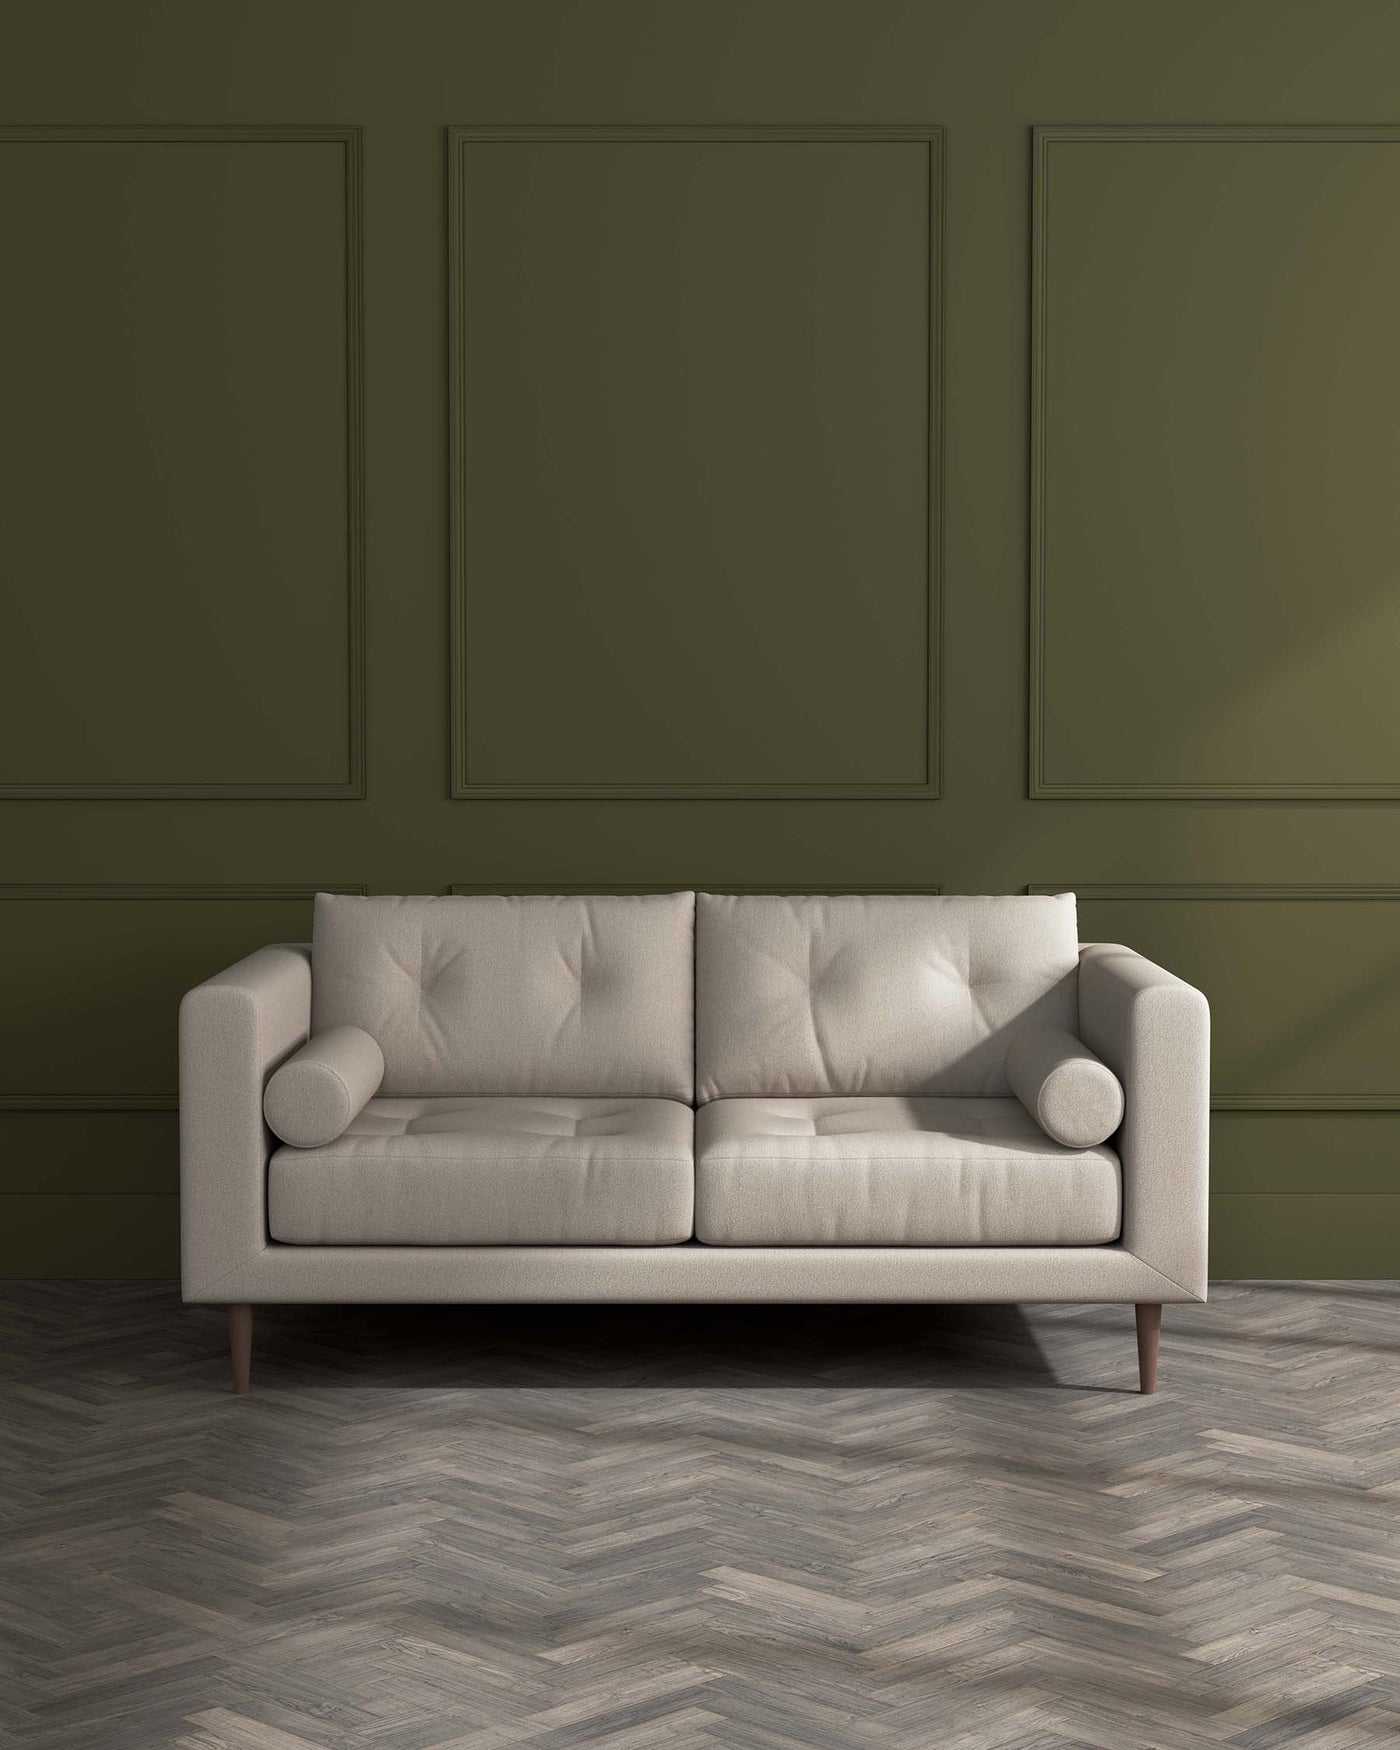 Modern three-seater sofa with a light beige upholstery and tufted backrest, featuring cylindrical side cushions and tapered wooden legs, set against a green panelled wall on a herringbone patterned wooden floor.